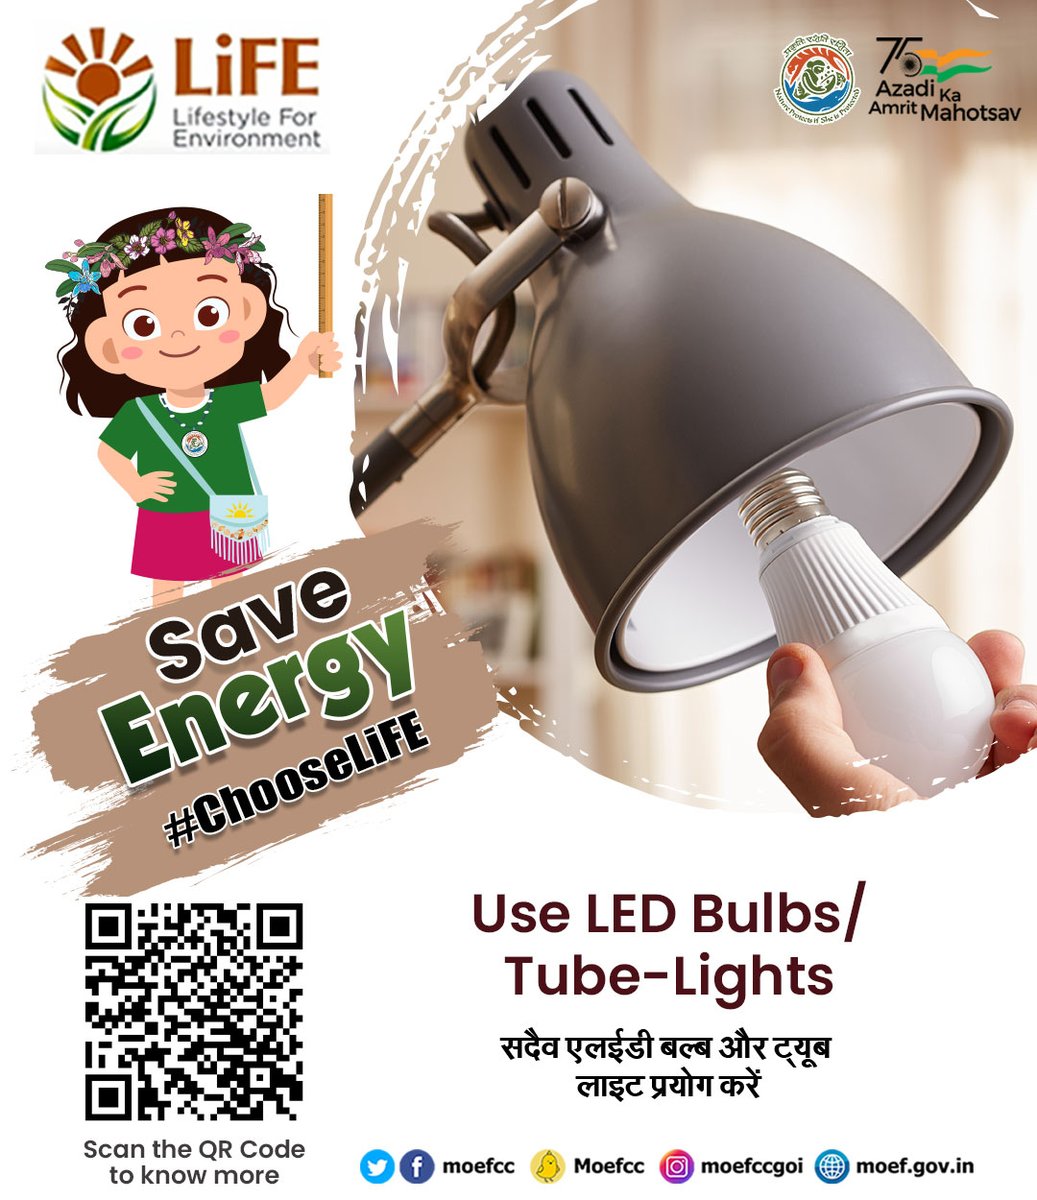 @DPD_India Save energy, and shape the future! Taking a small step towards energy conservation makes a big contribution. #EnergyConservation #GreenIndia #SaveEnergy @MIB_India @moefcc